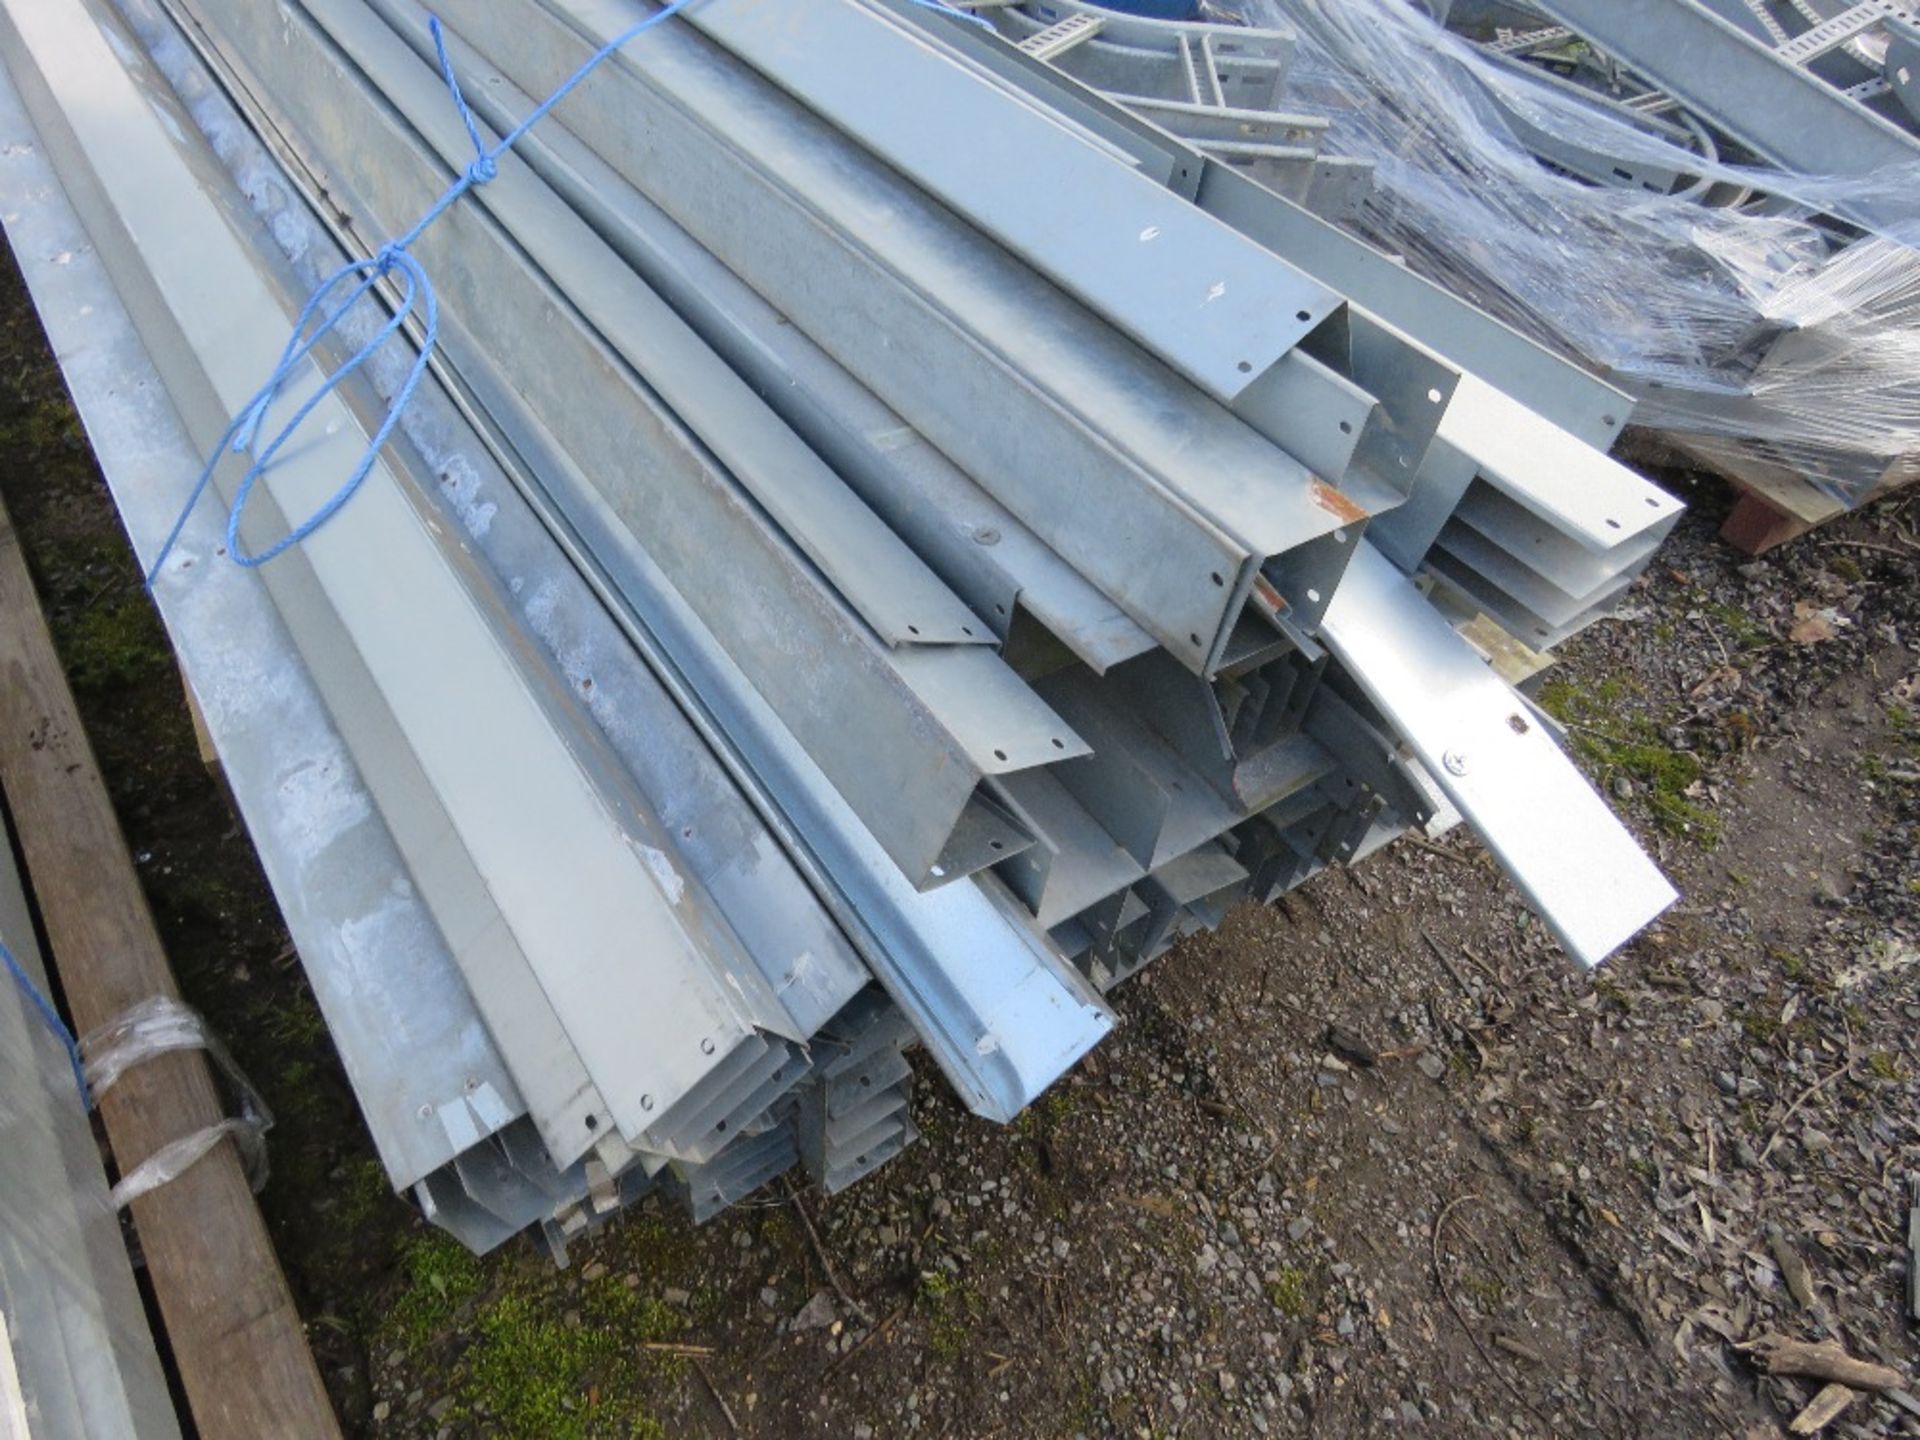 LARGE QUANTITY OF METAL DUCTING PARTS INCLUDING DUCTS AT 9FT LENGTH APPROX. SOURCED FROM COMPANY LIQ - Bild 4 aus 9